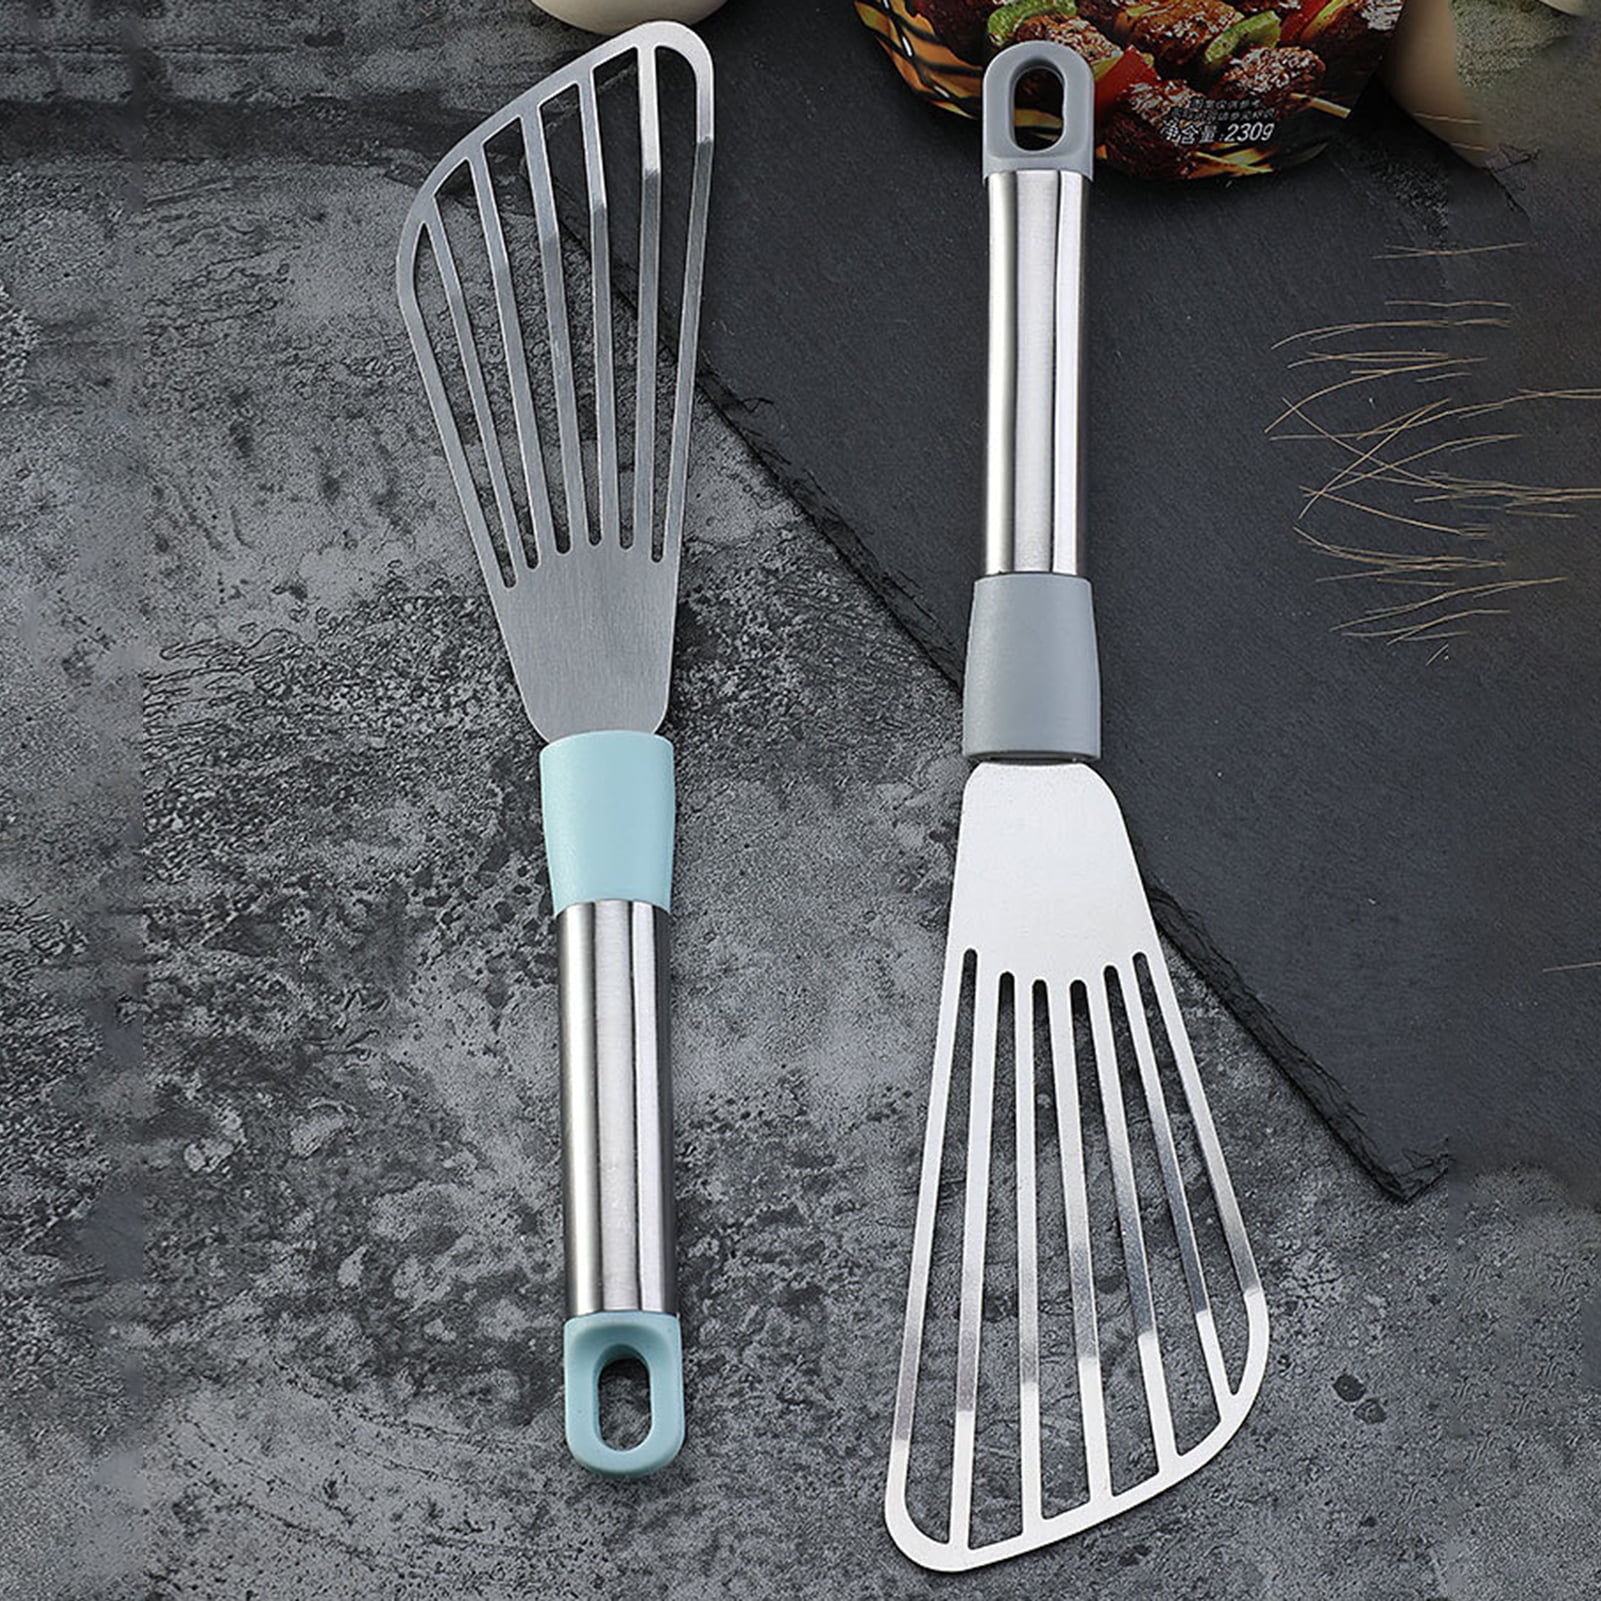 Stainless Fish Spatula, Nonstick Spatula Turner, Thin Slotted Spatula For  Fish/egg/meat/dumpling Turning, Flipping, Frying And Grilling1pcs)